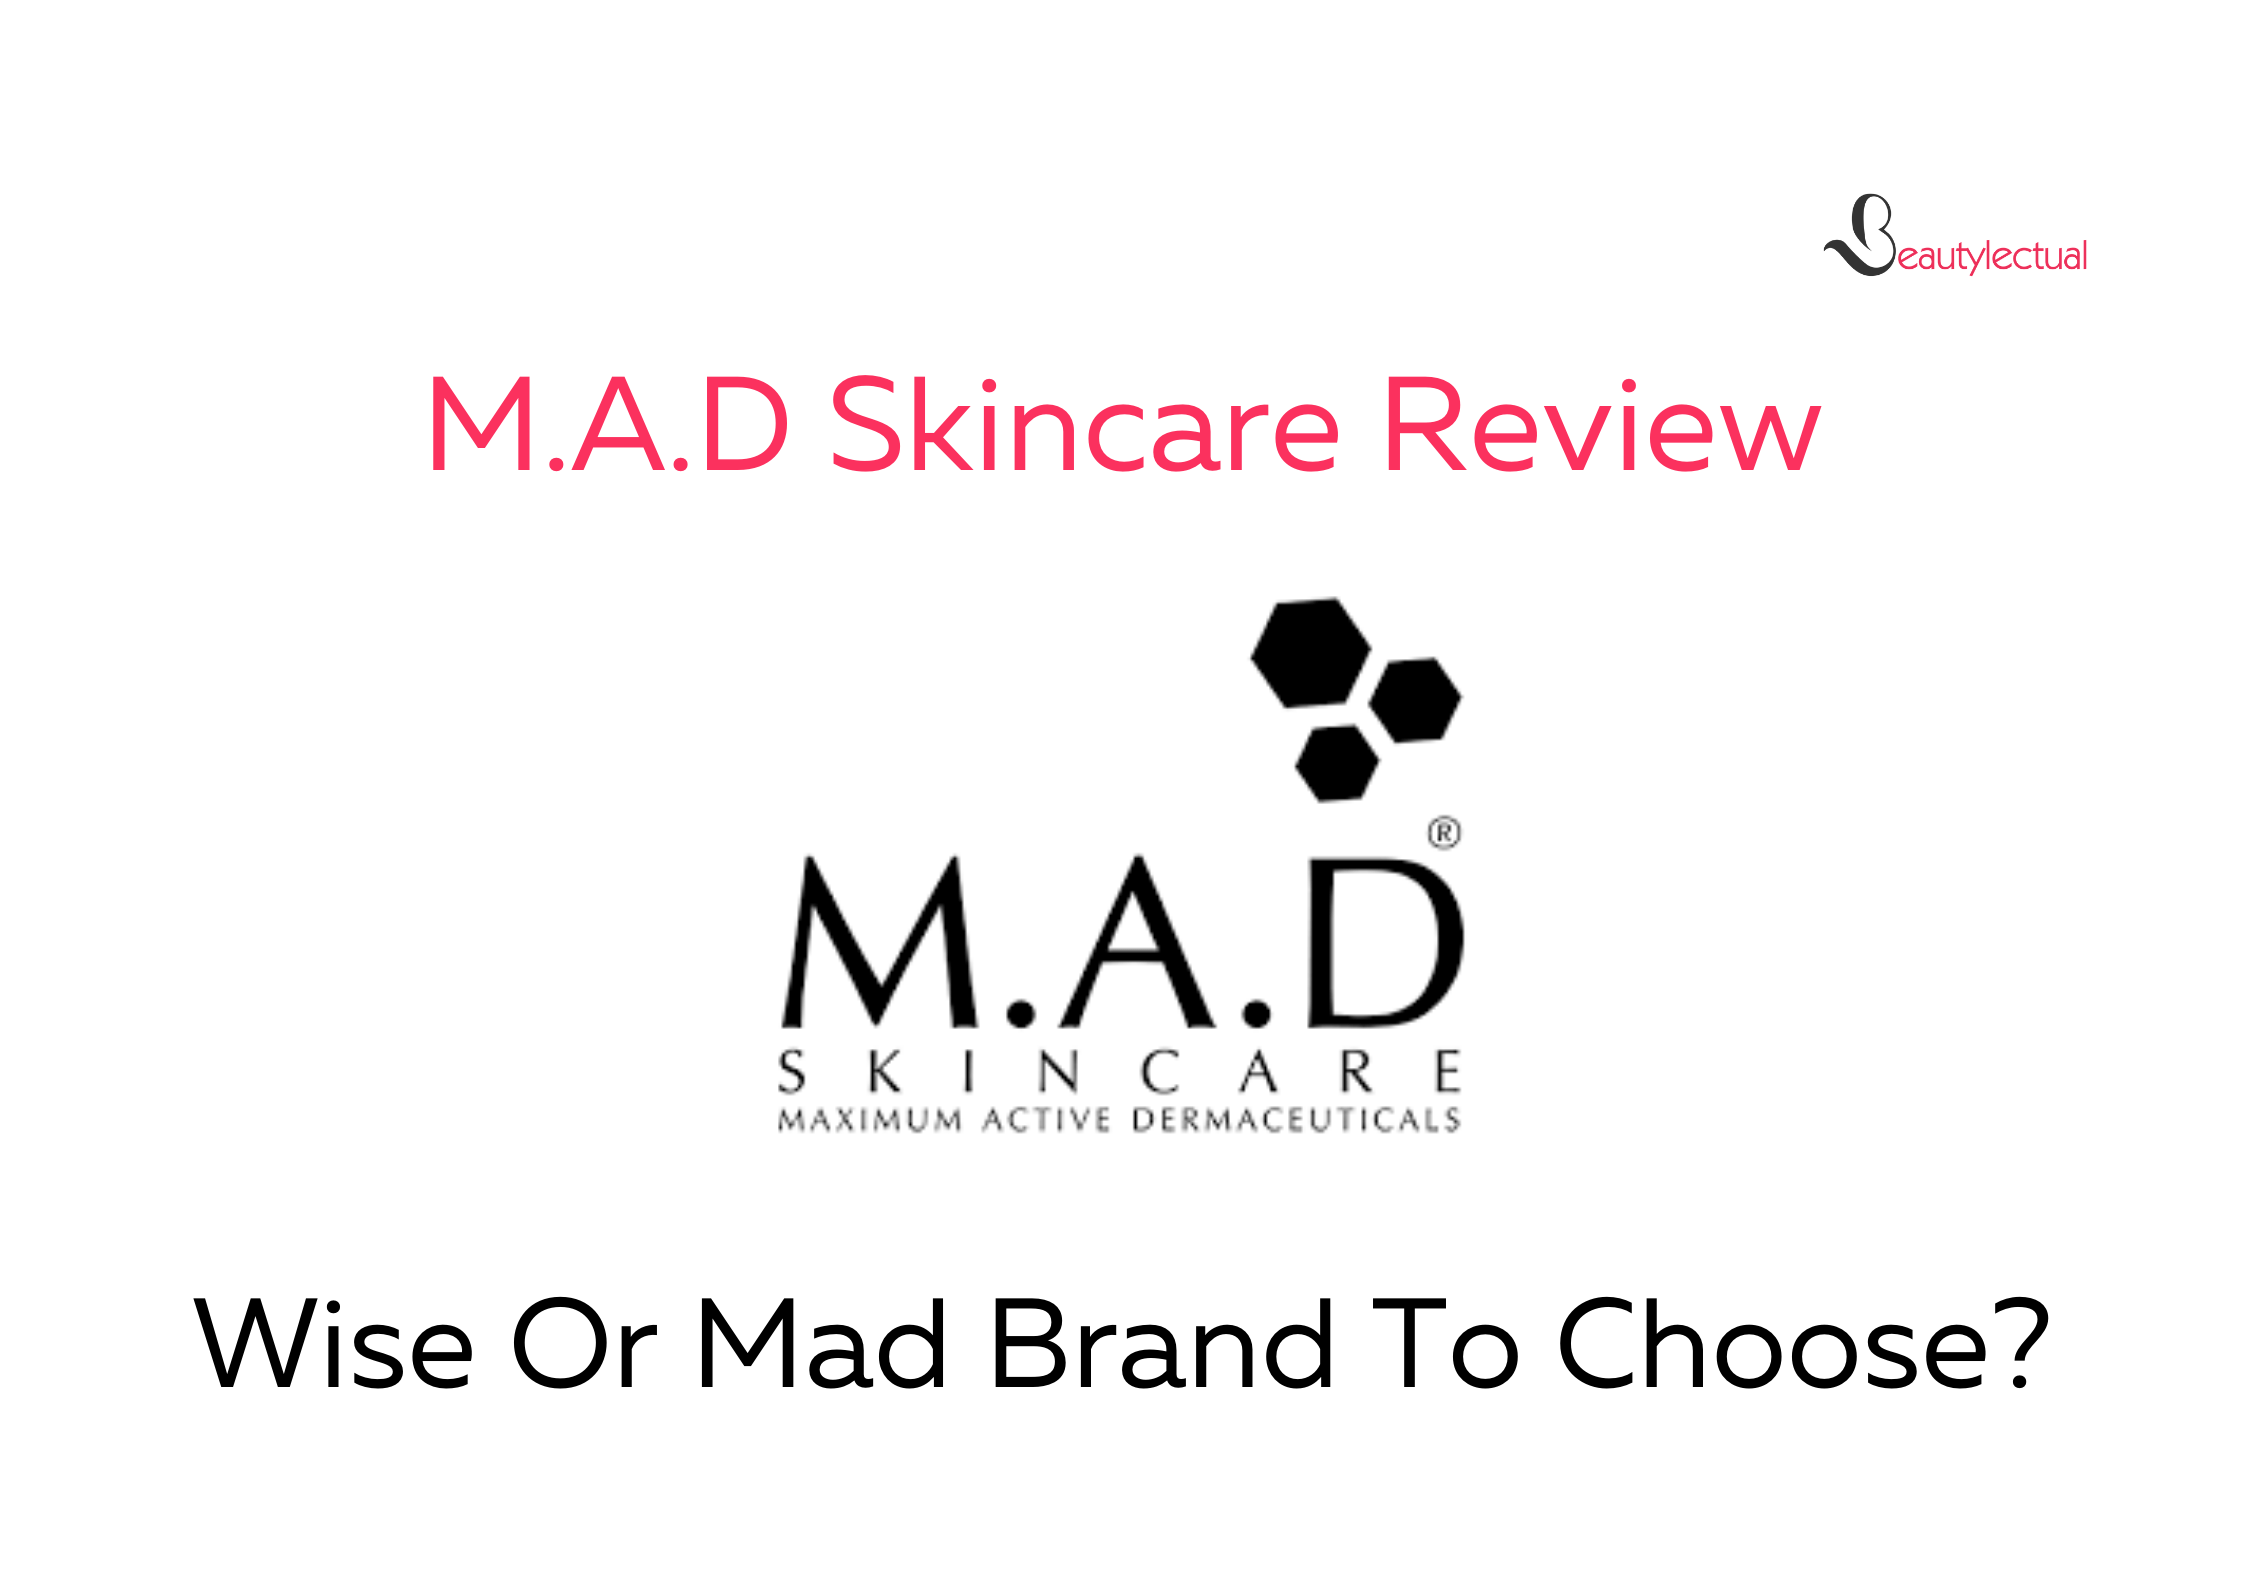 M.A.D Skincare Review